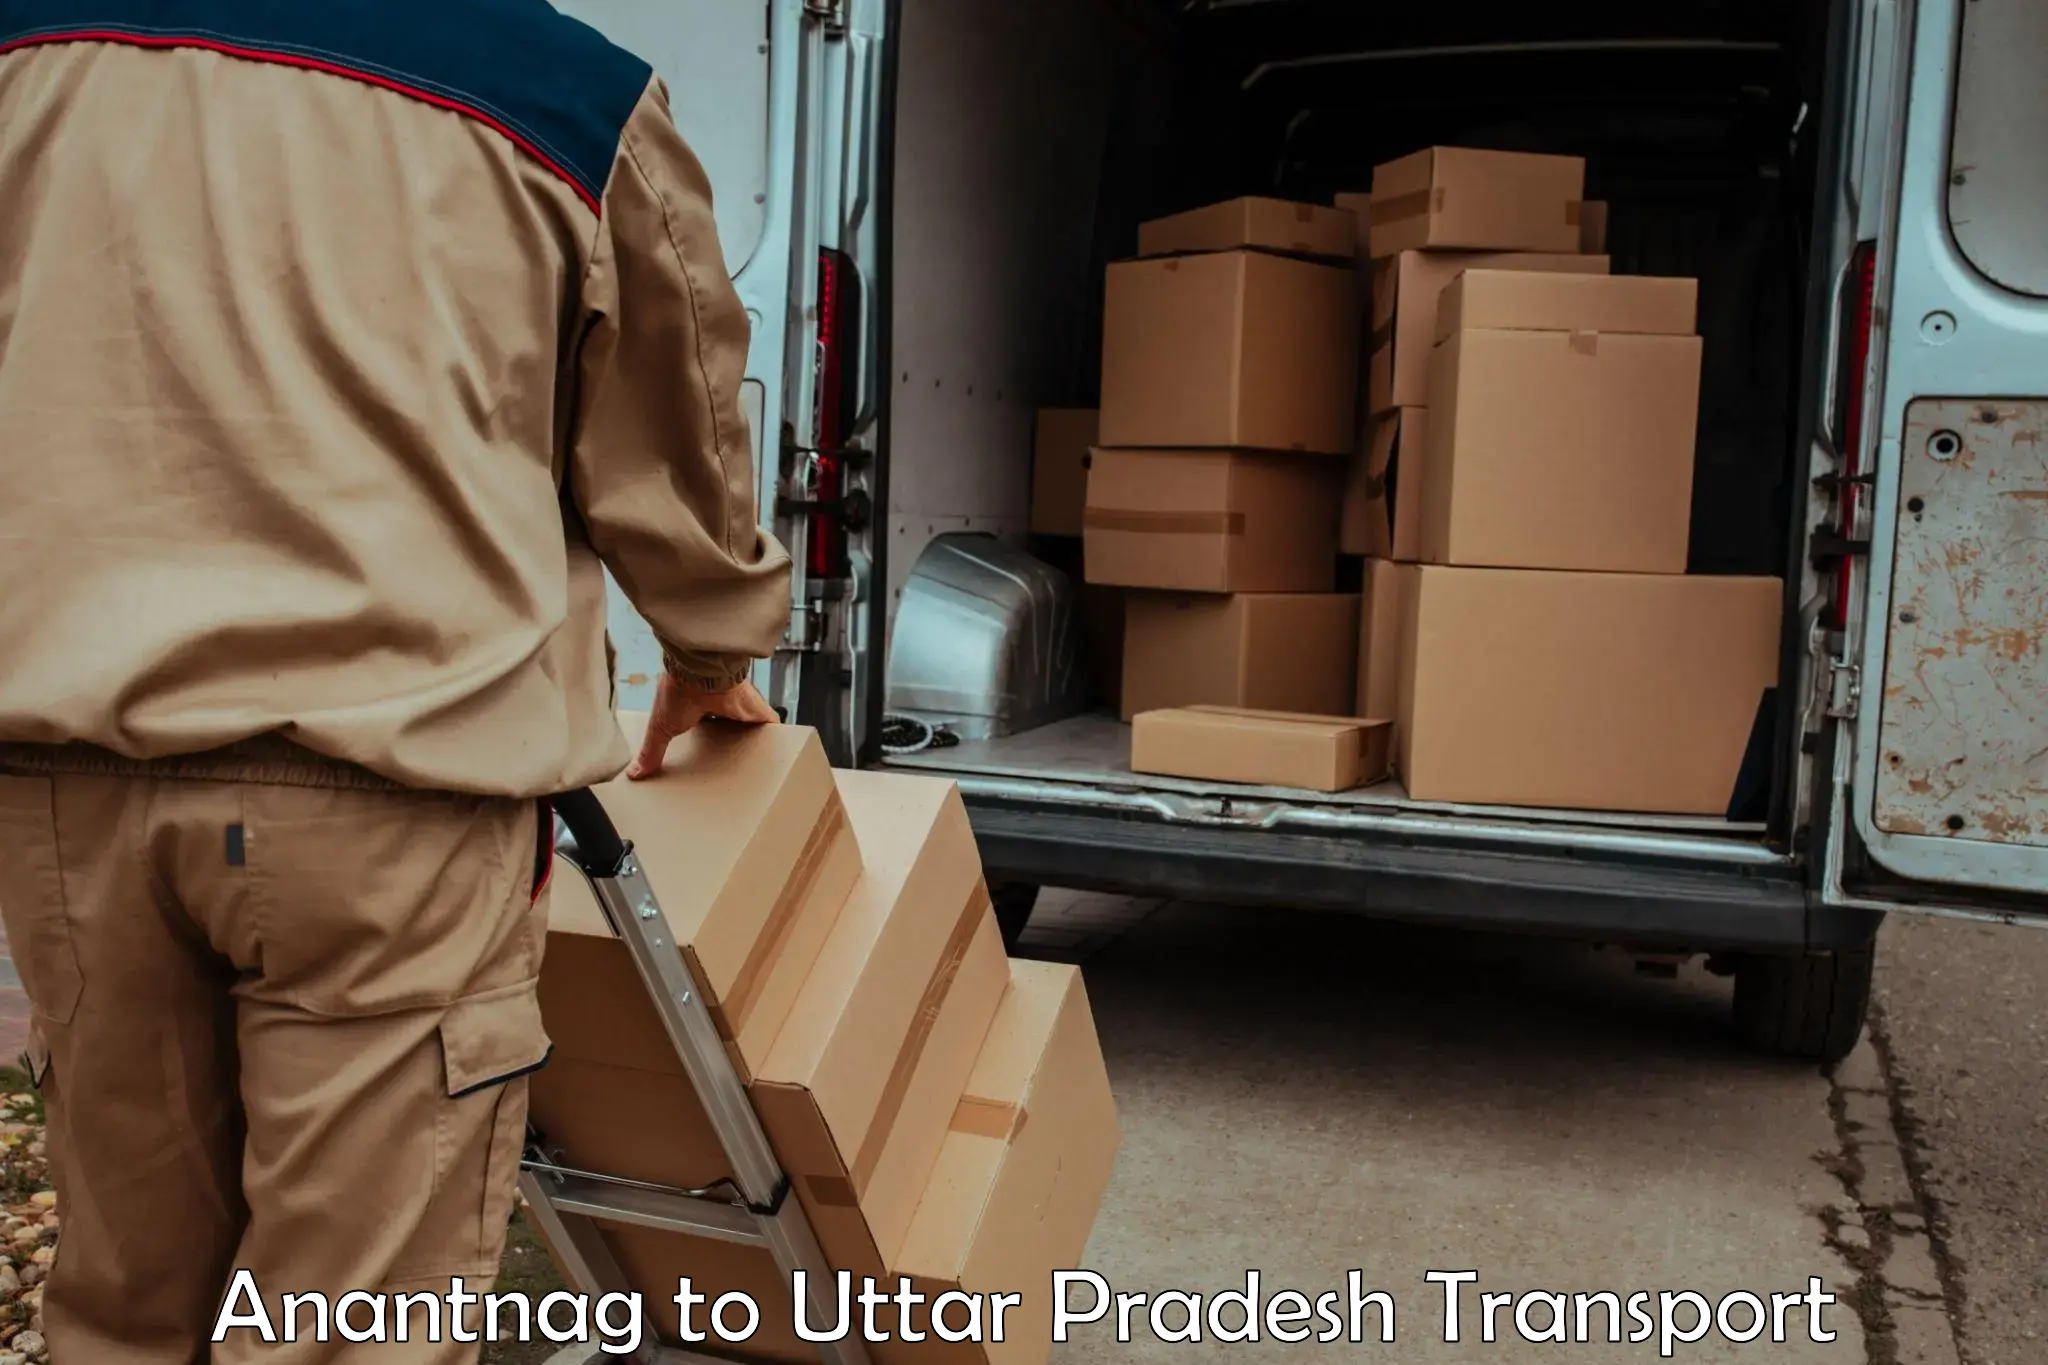 Air freight transport services Anantnag to Lucknow